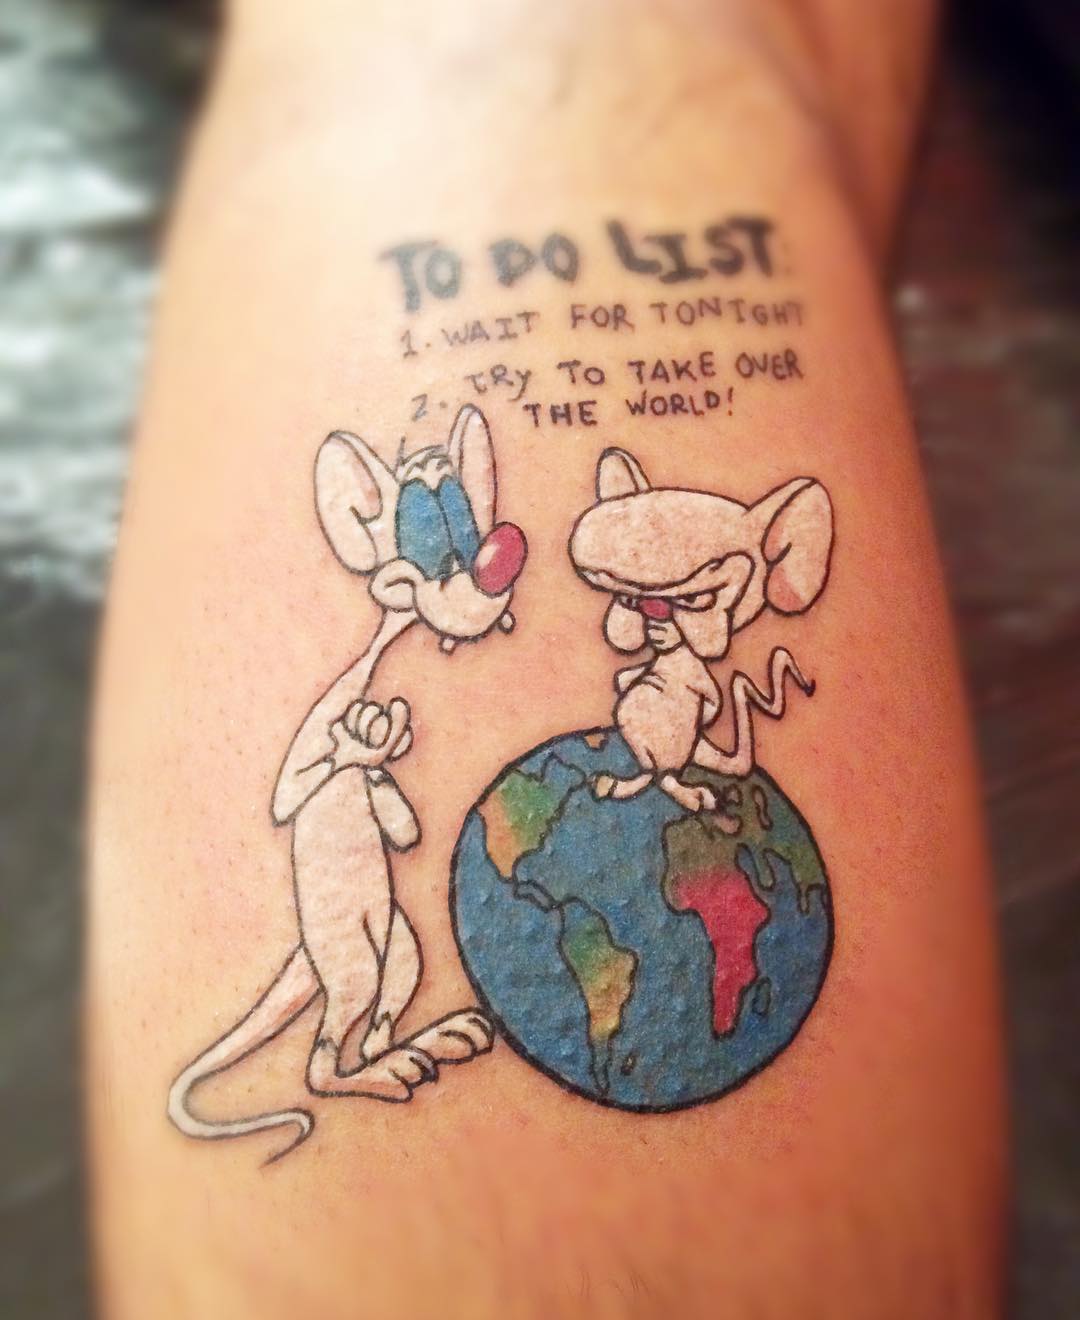 cartoon characters tattoos - To Do List 1. Wait For Tonight Try To Take Over The World!